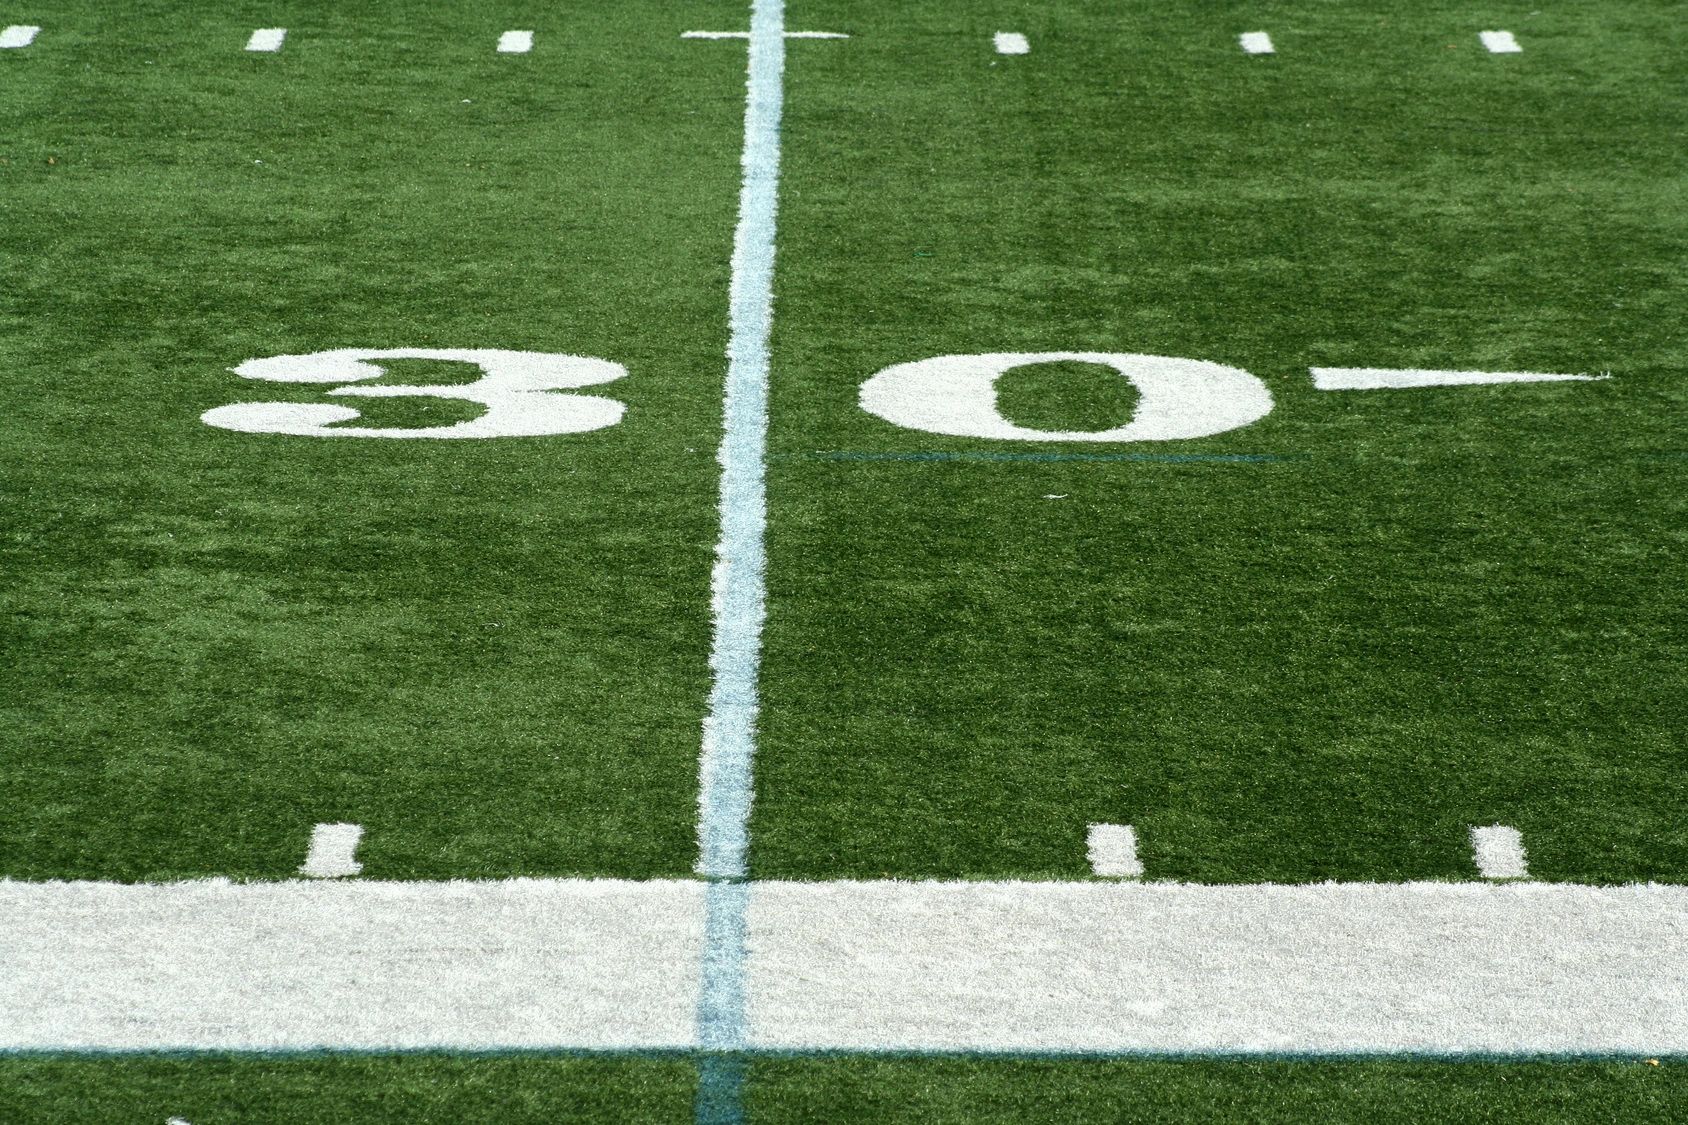 picture of the 30 yard line on a football field